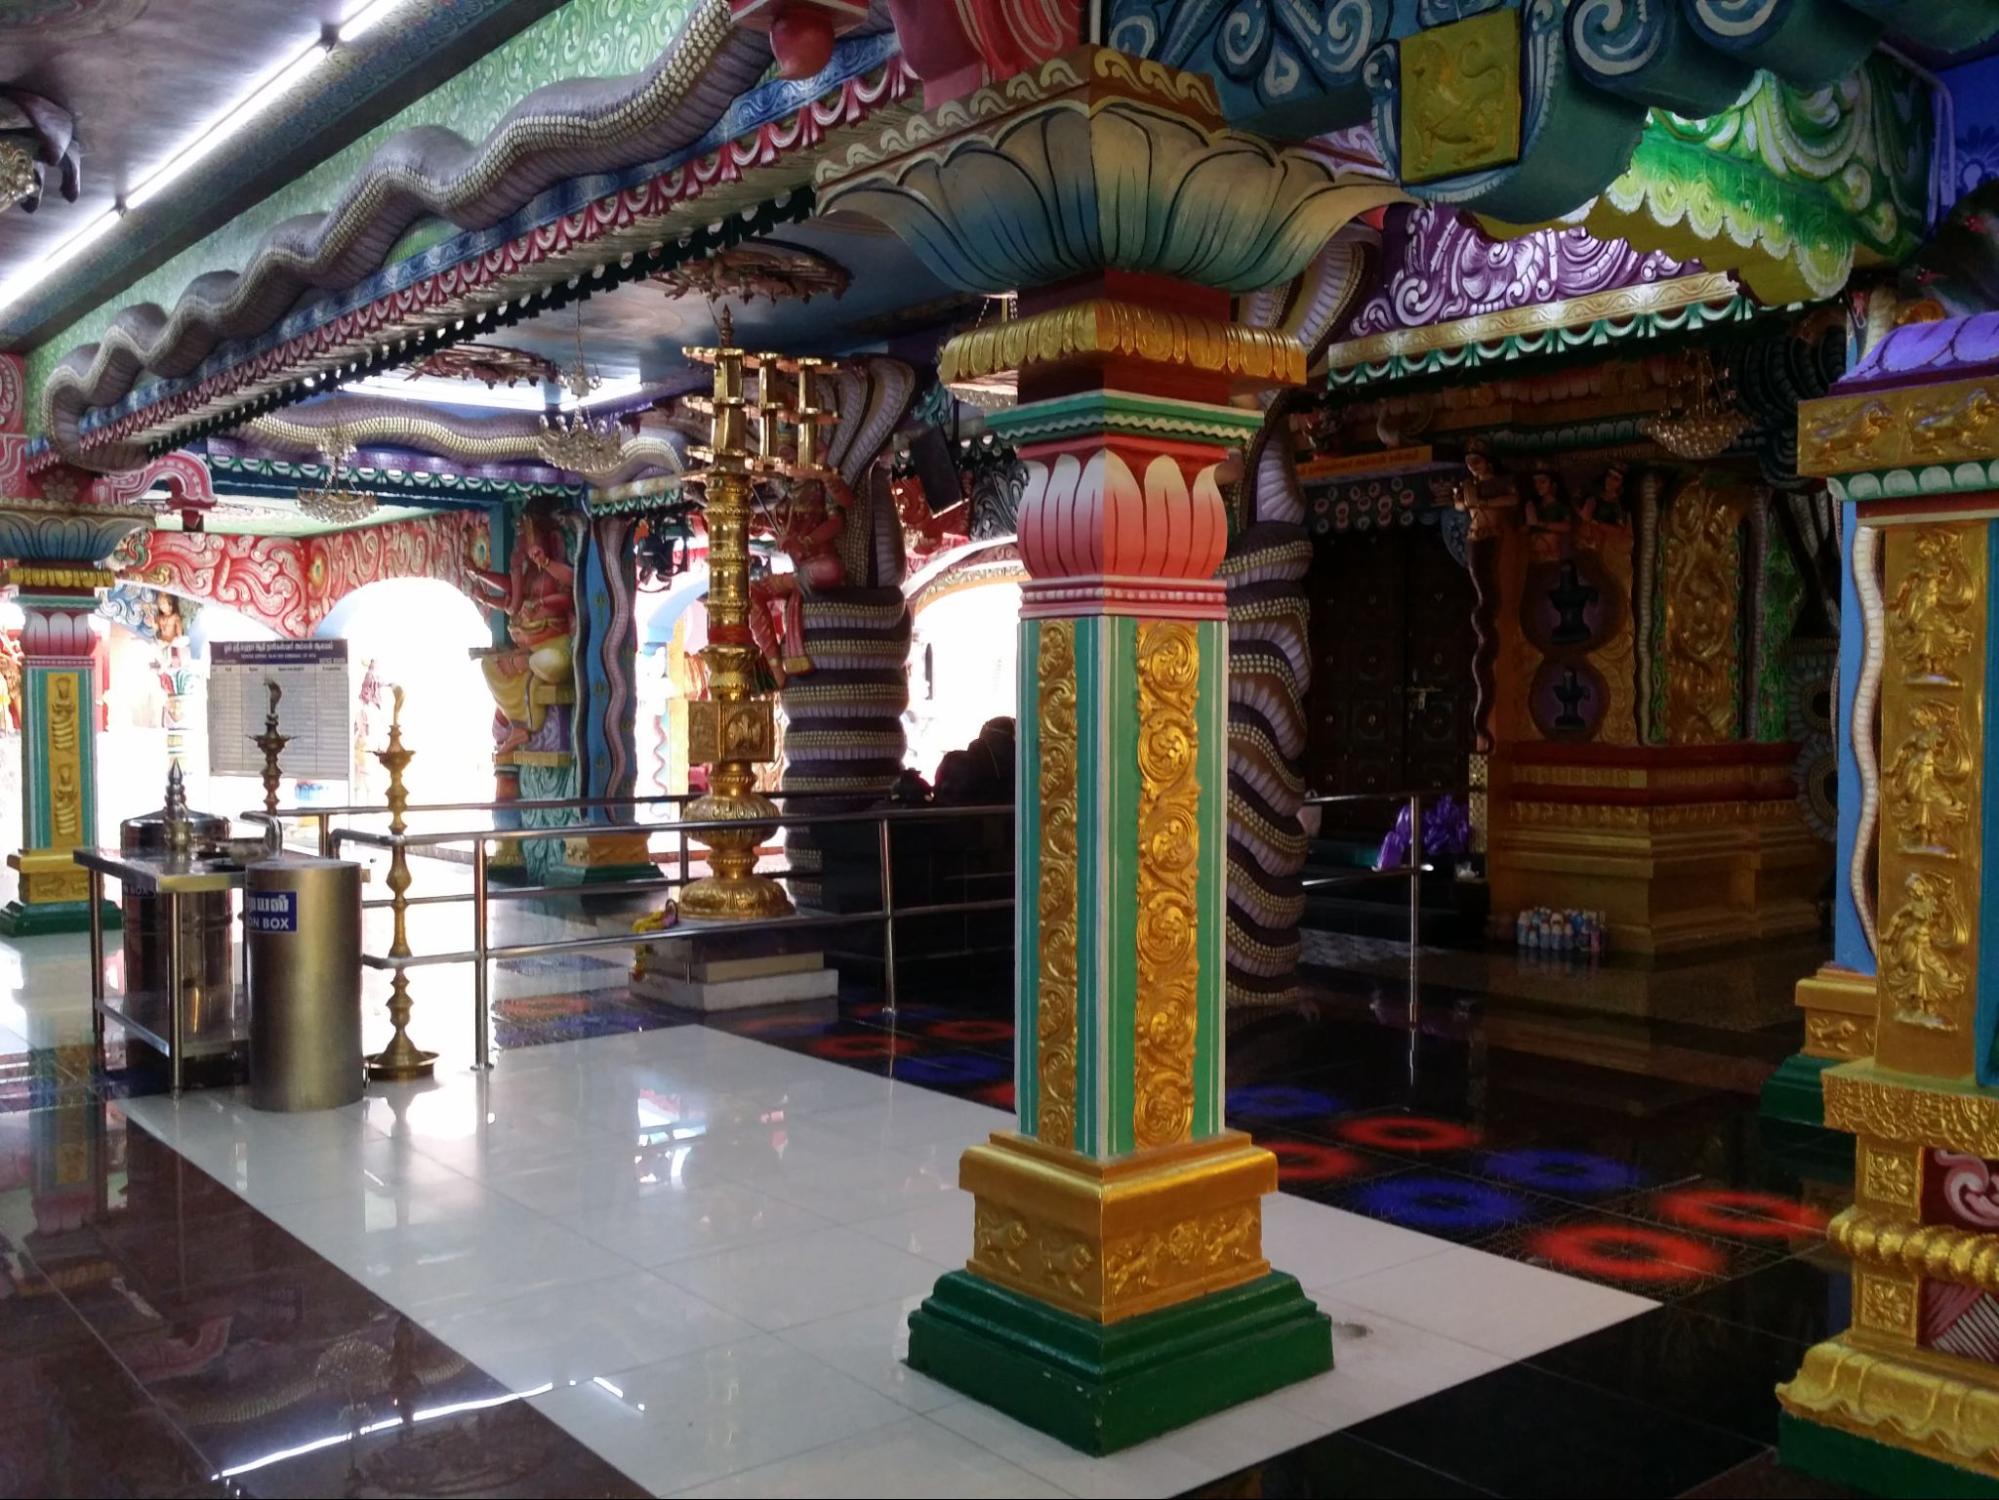 Indian temple interior view